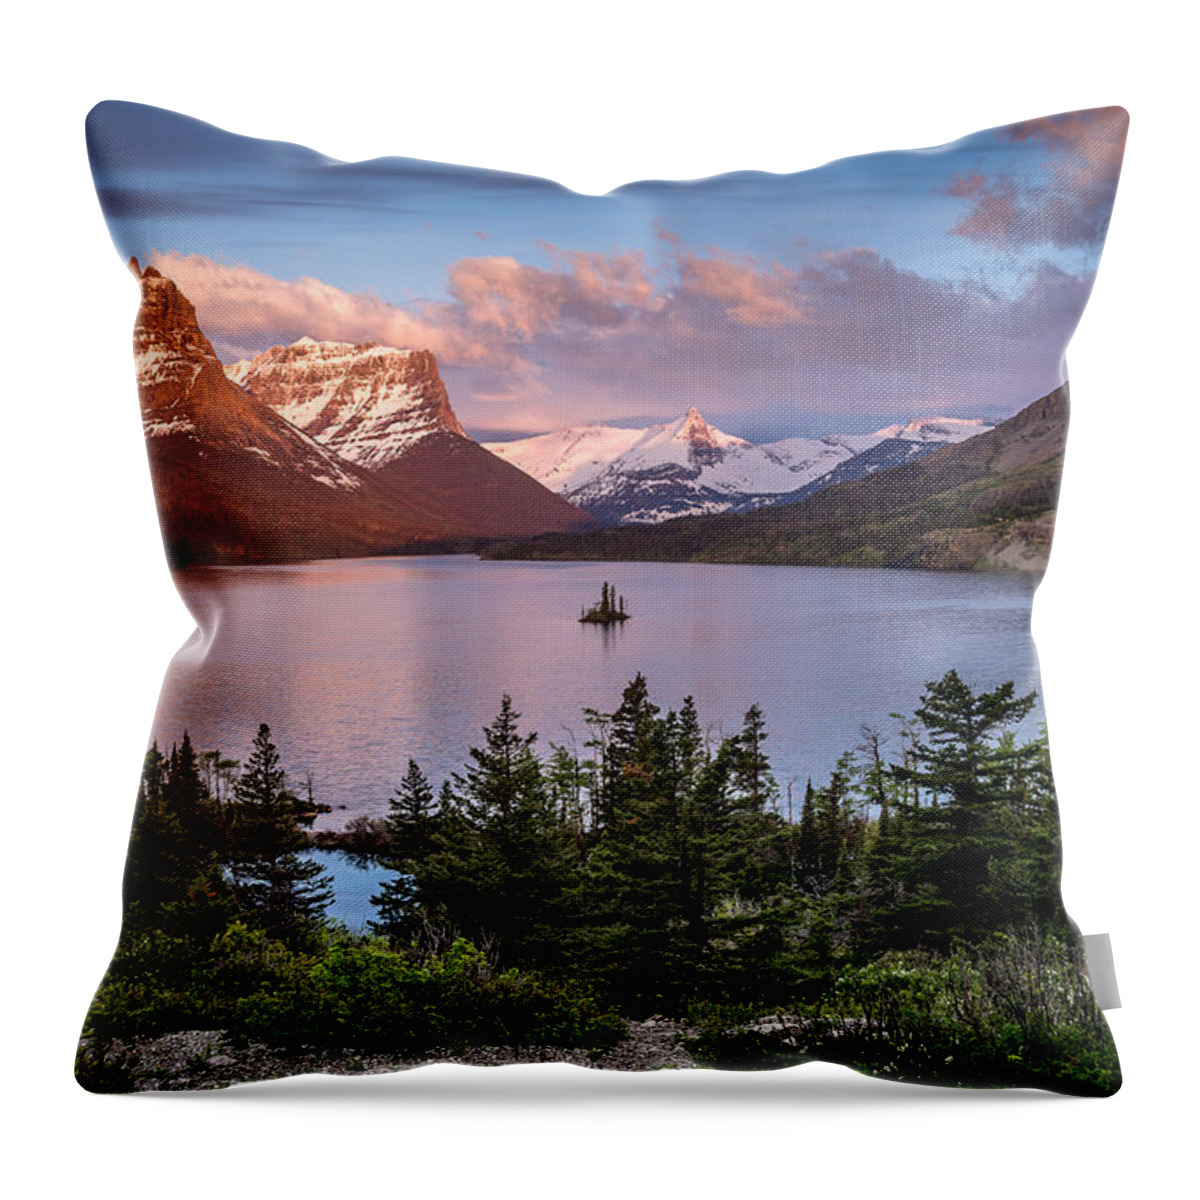 Glacier National Park Throw Pillow featuring the photograph Wild Goose Island Morning 1 by Greg Nyquist